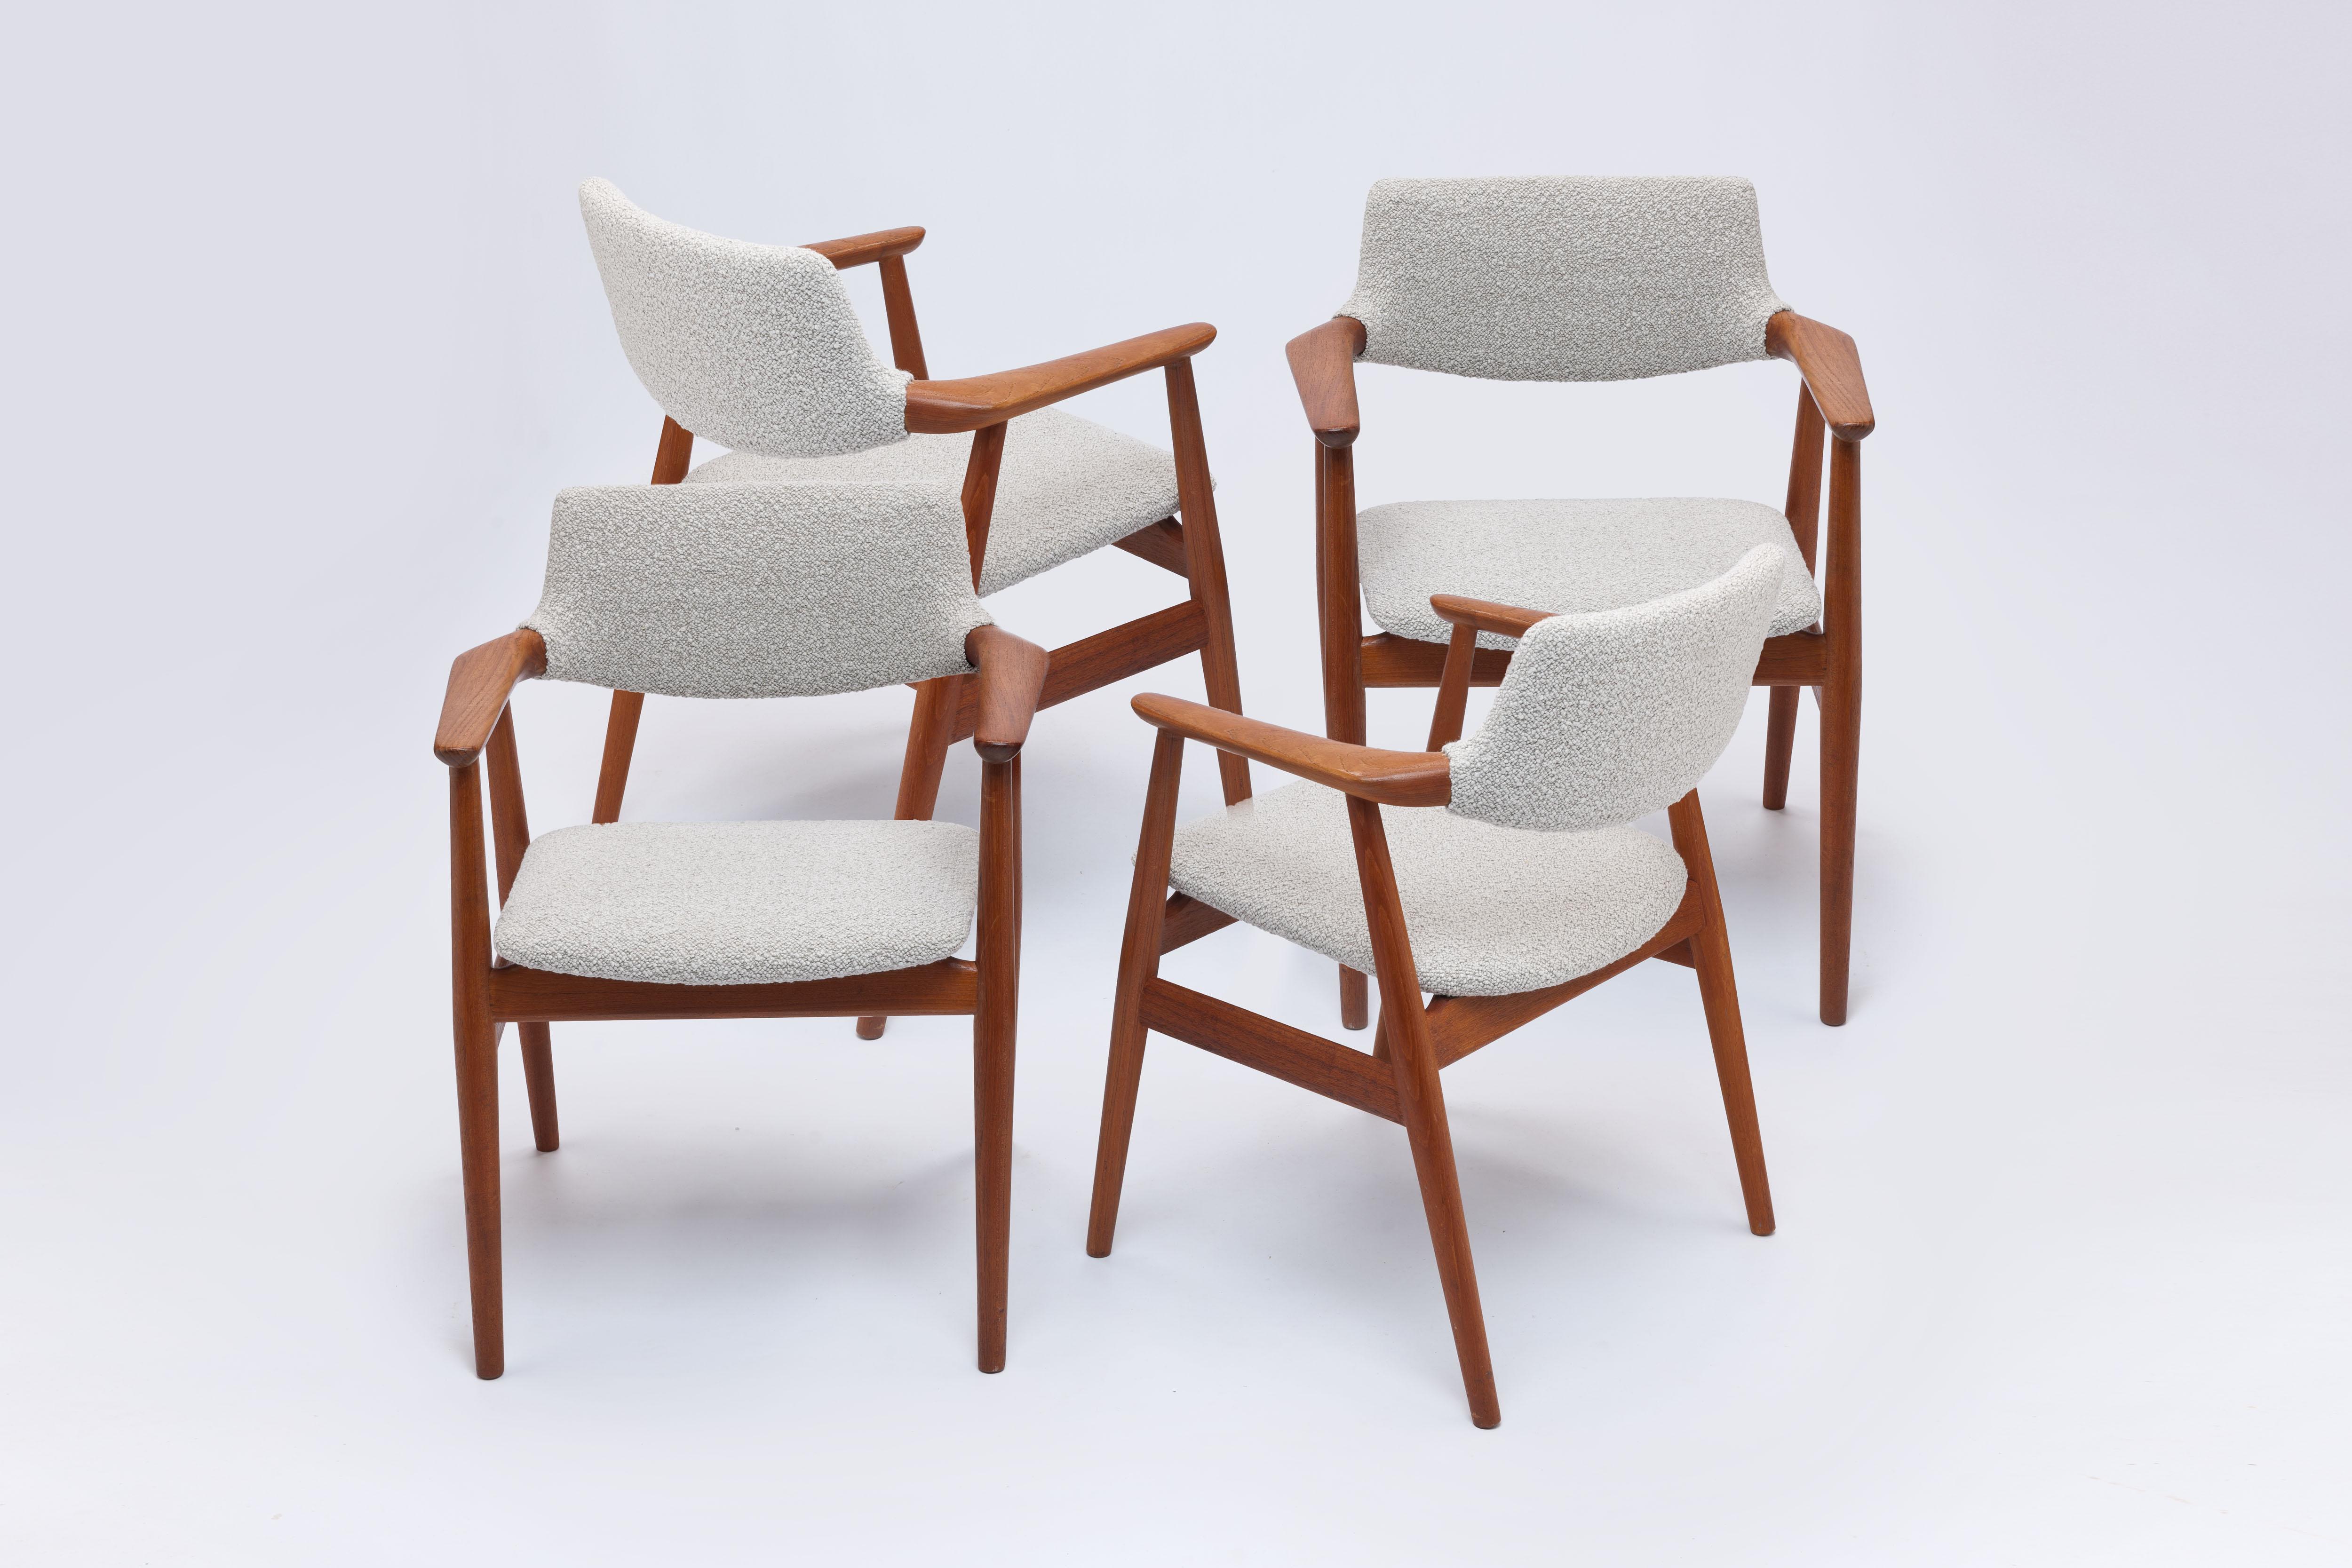 Set of 4 teak armchairs by Danish designer Svend Åge Eriksen, model GM11 designed in 1962 for Glostrup Møbelfabrik, Denmark. The floating back support of this design is a striking and beautiful feature of this timeless design executed from solid